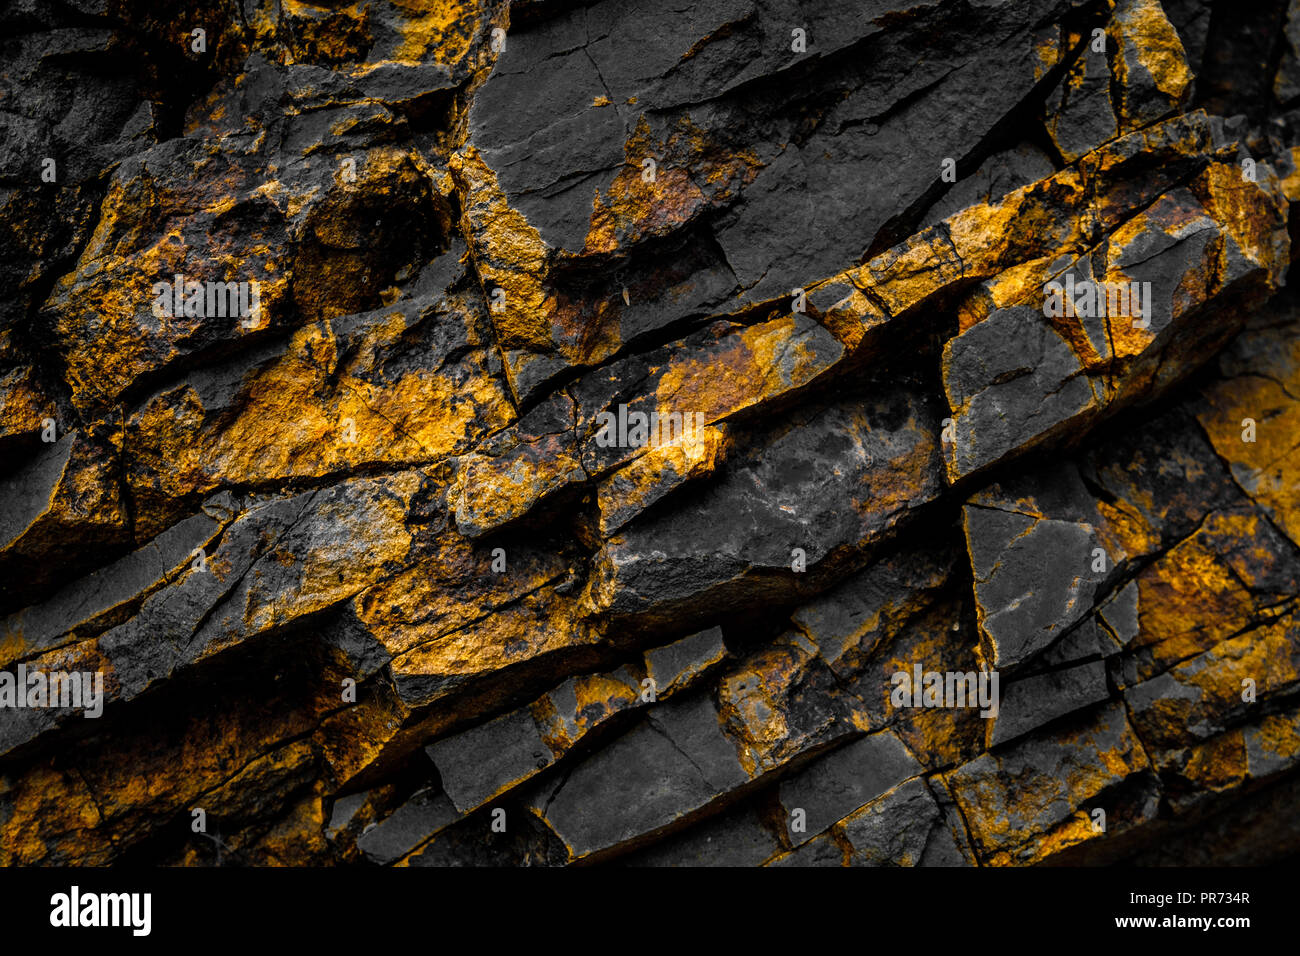 black rock background with gold  / yellow colored rocks - Stock Photo